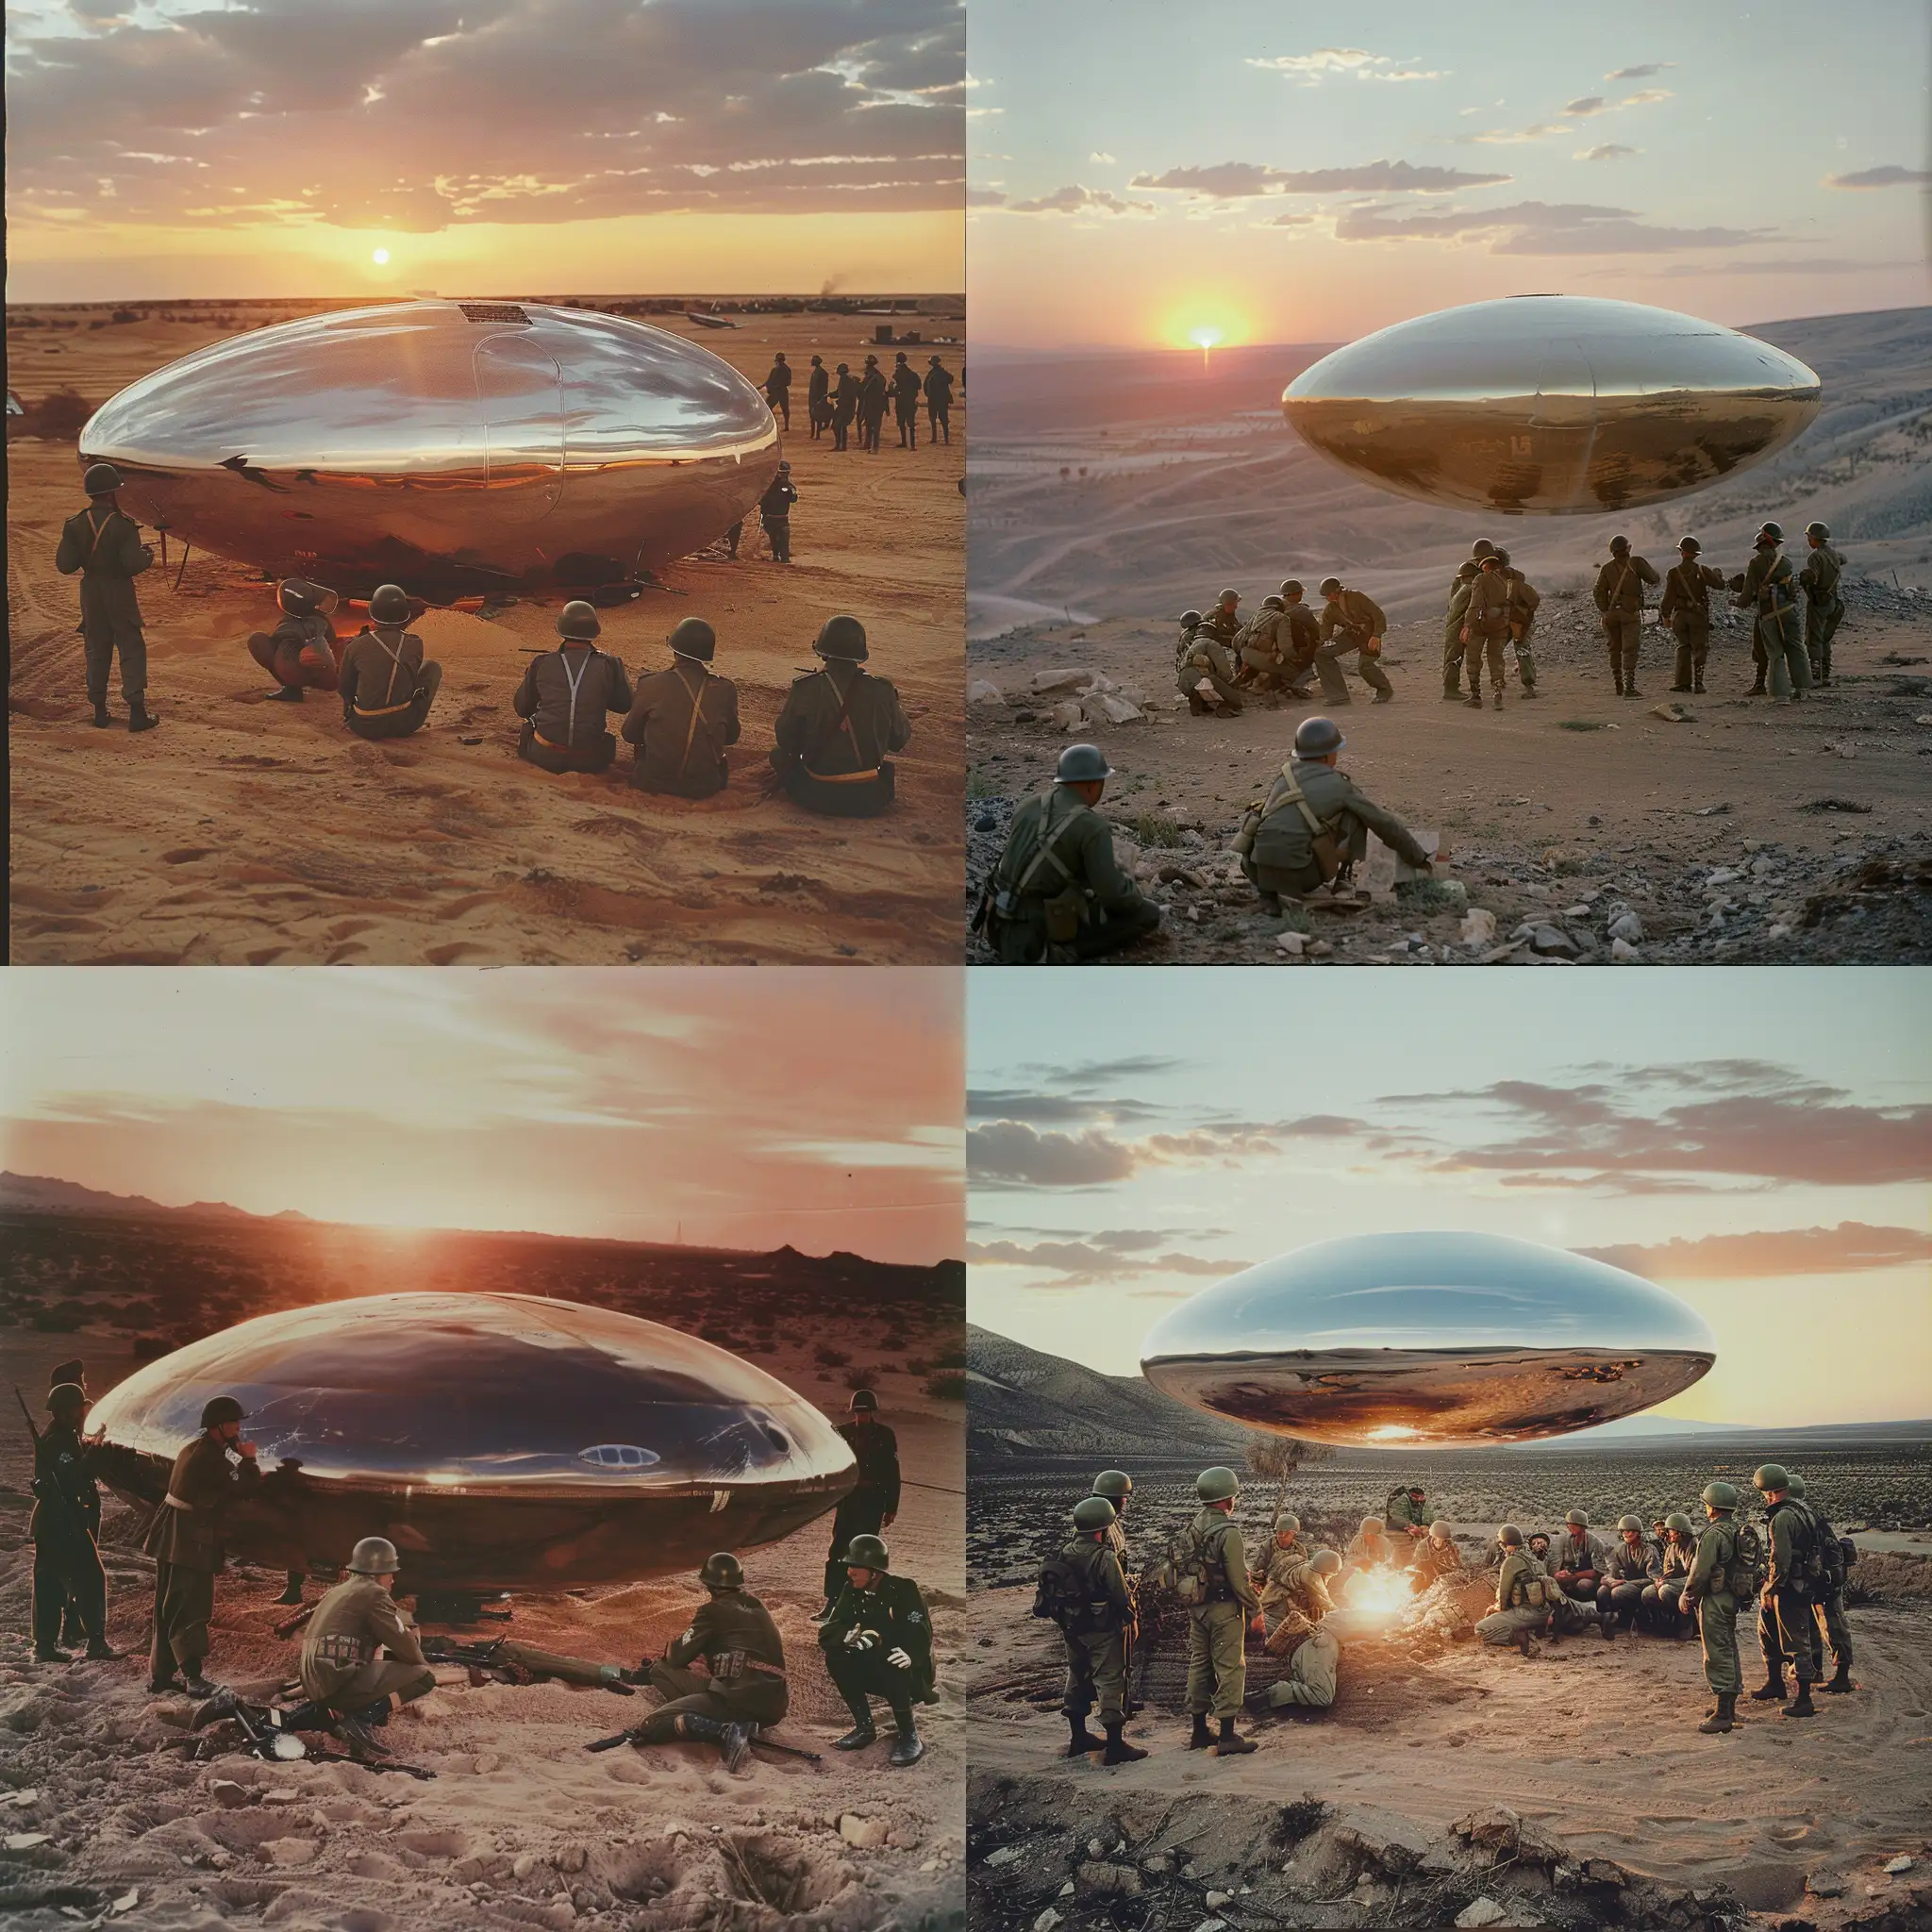 Shiny metallic Flying saucer crash in desert at sunset, 1950s soldiers surrounding it, 1950s photo